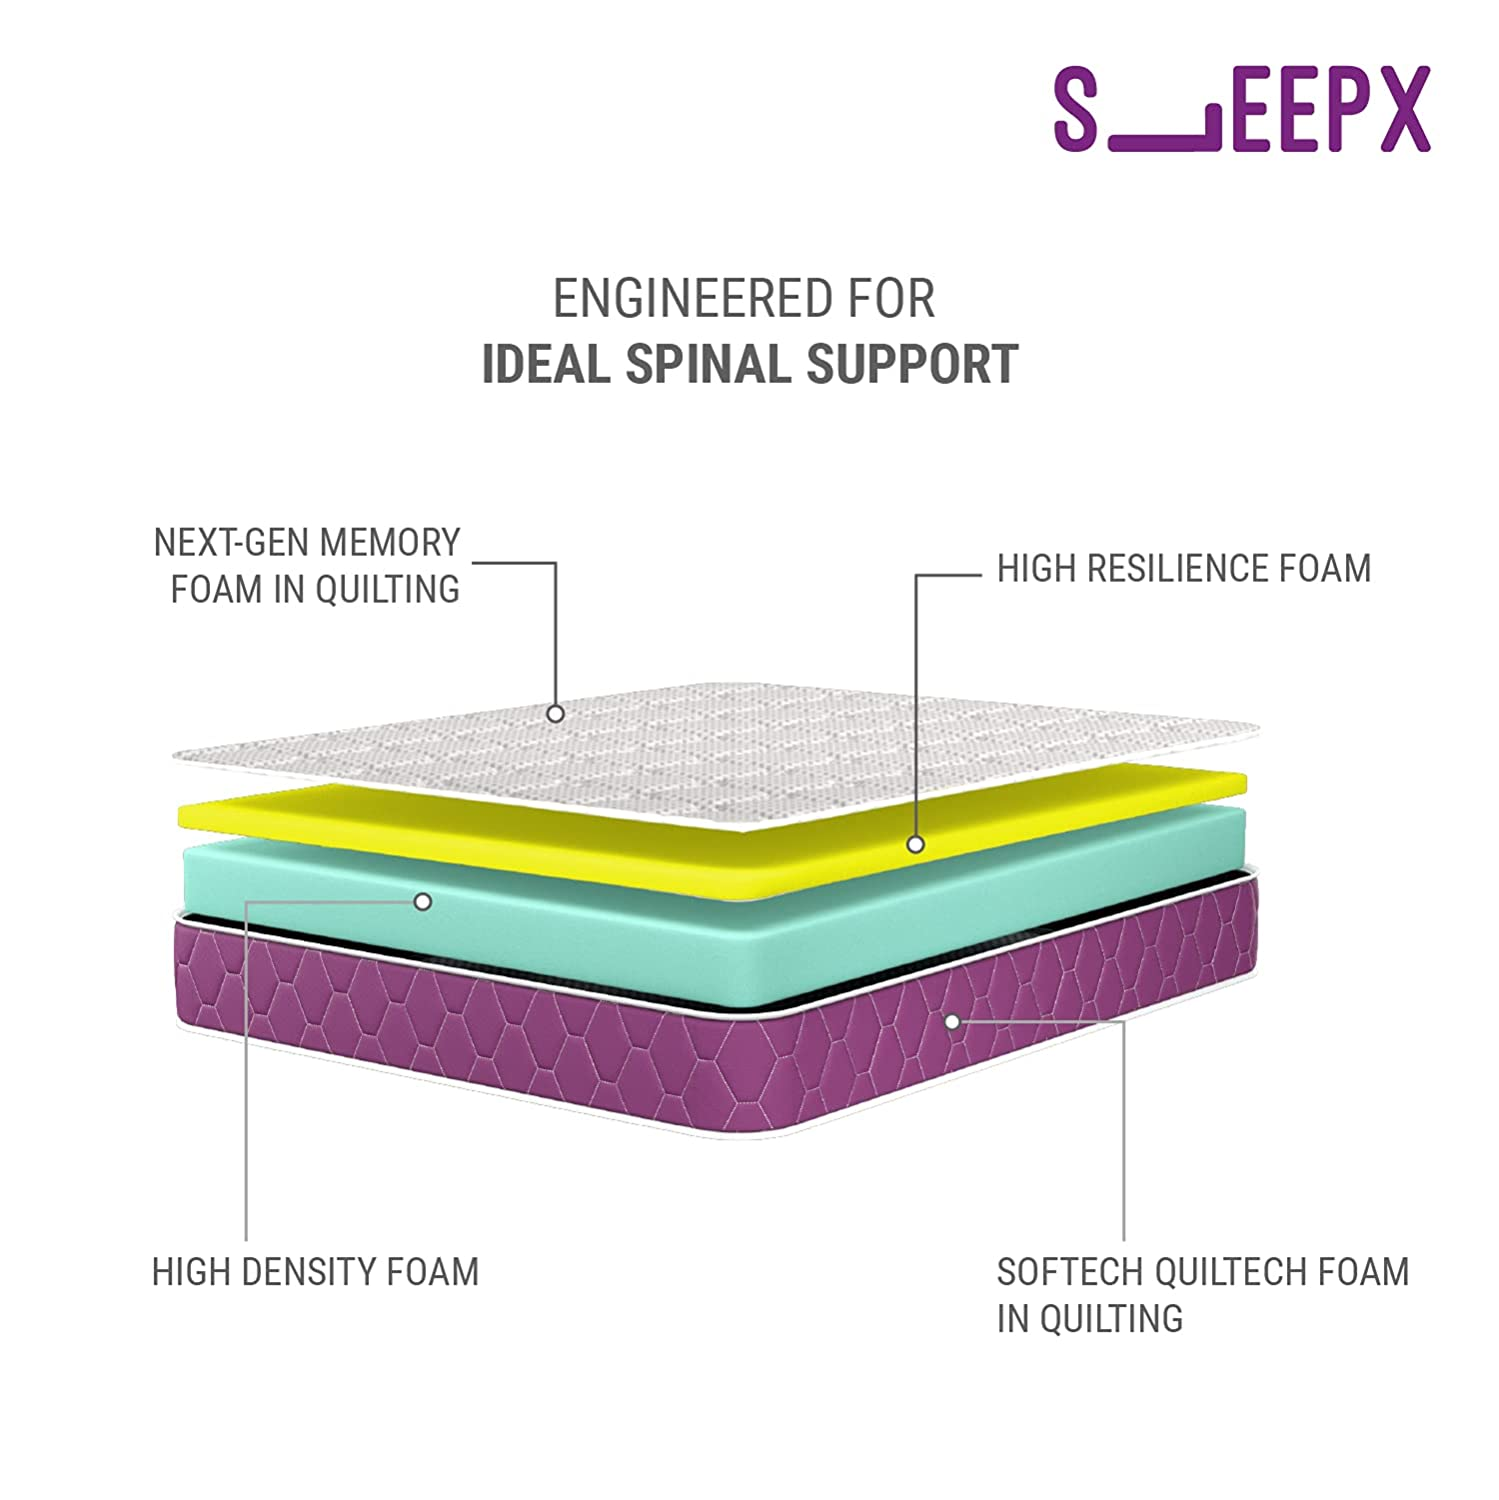 When comparing an orthopedic mattress vs. a Posturepedic mattress it is important to note that the former may be made entirely from foam.